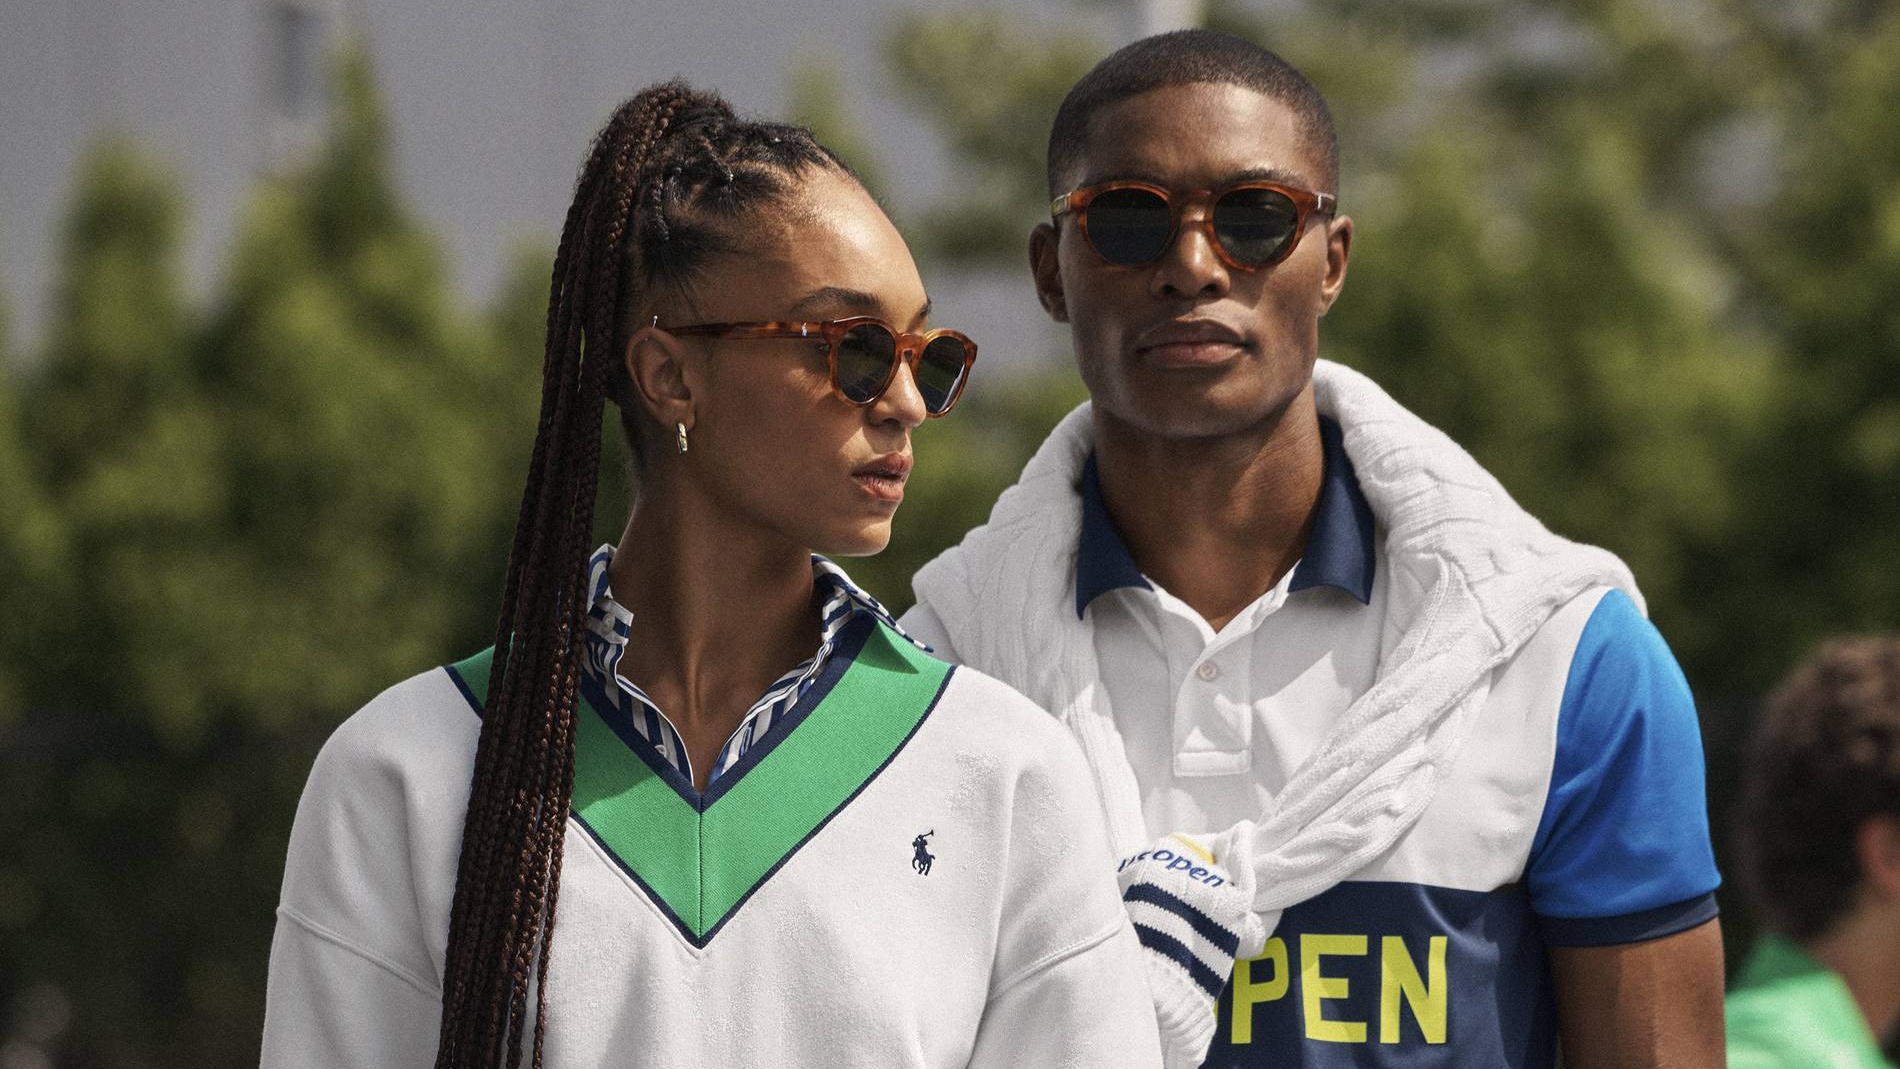 polo ralph lauren us open collection 2022 campaign image